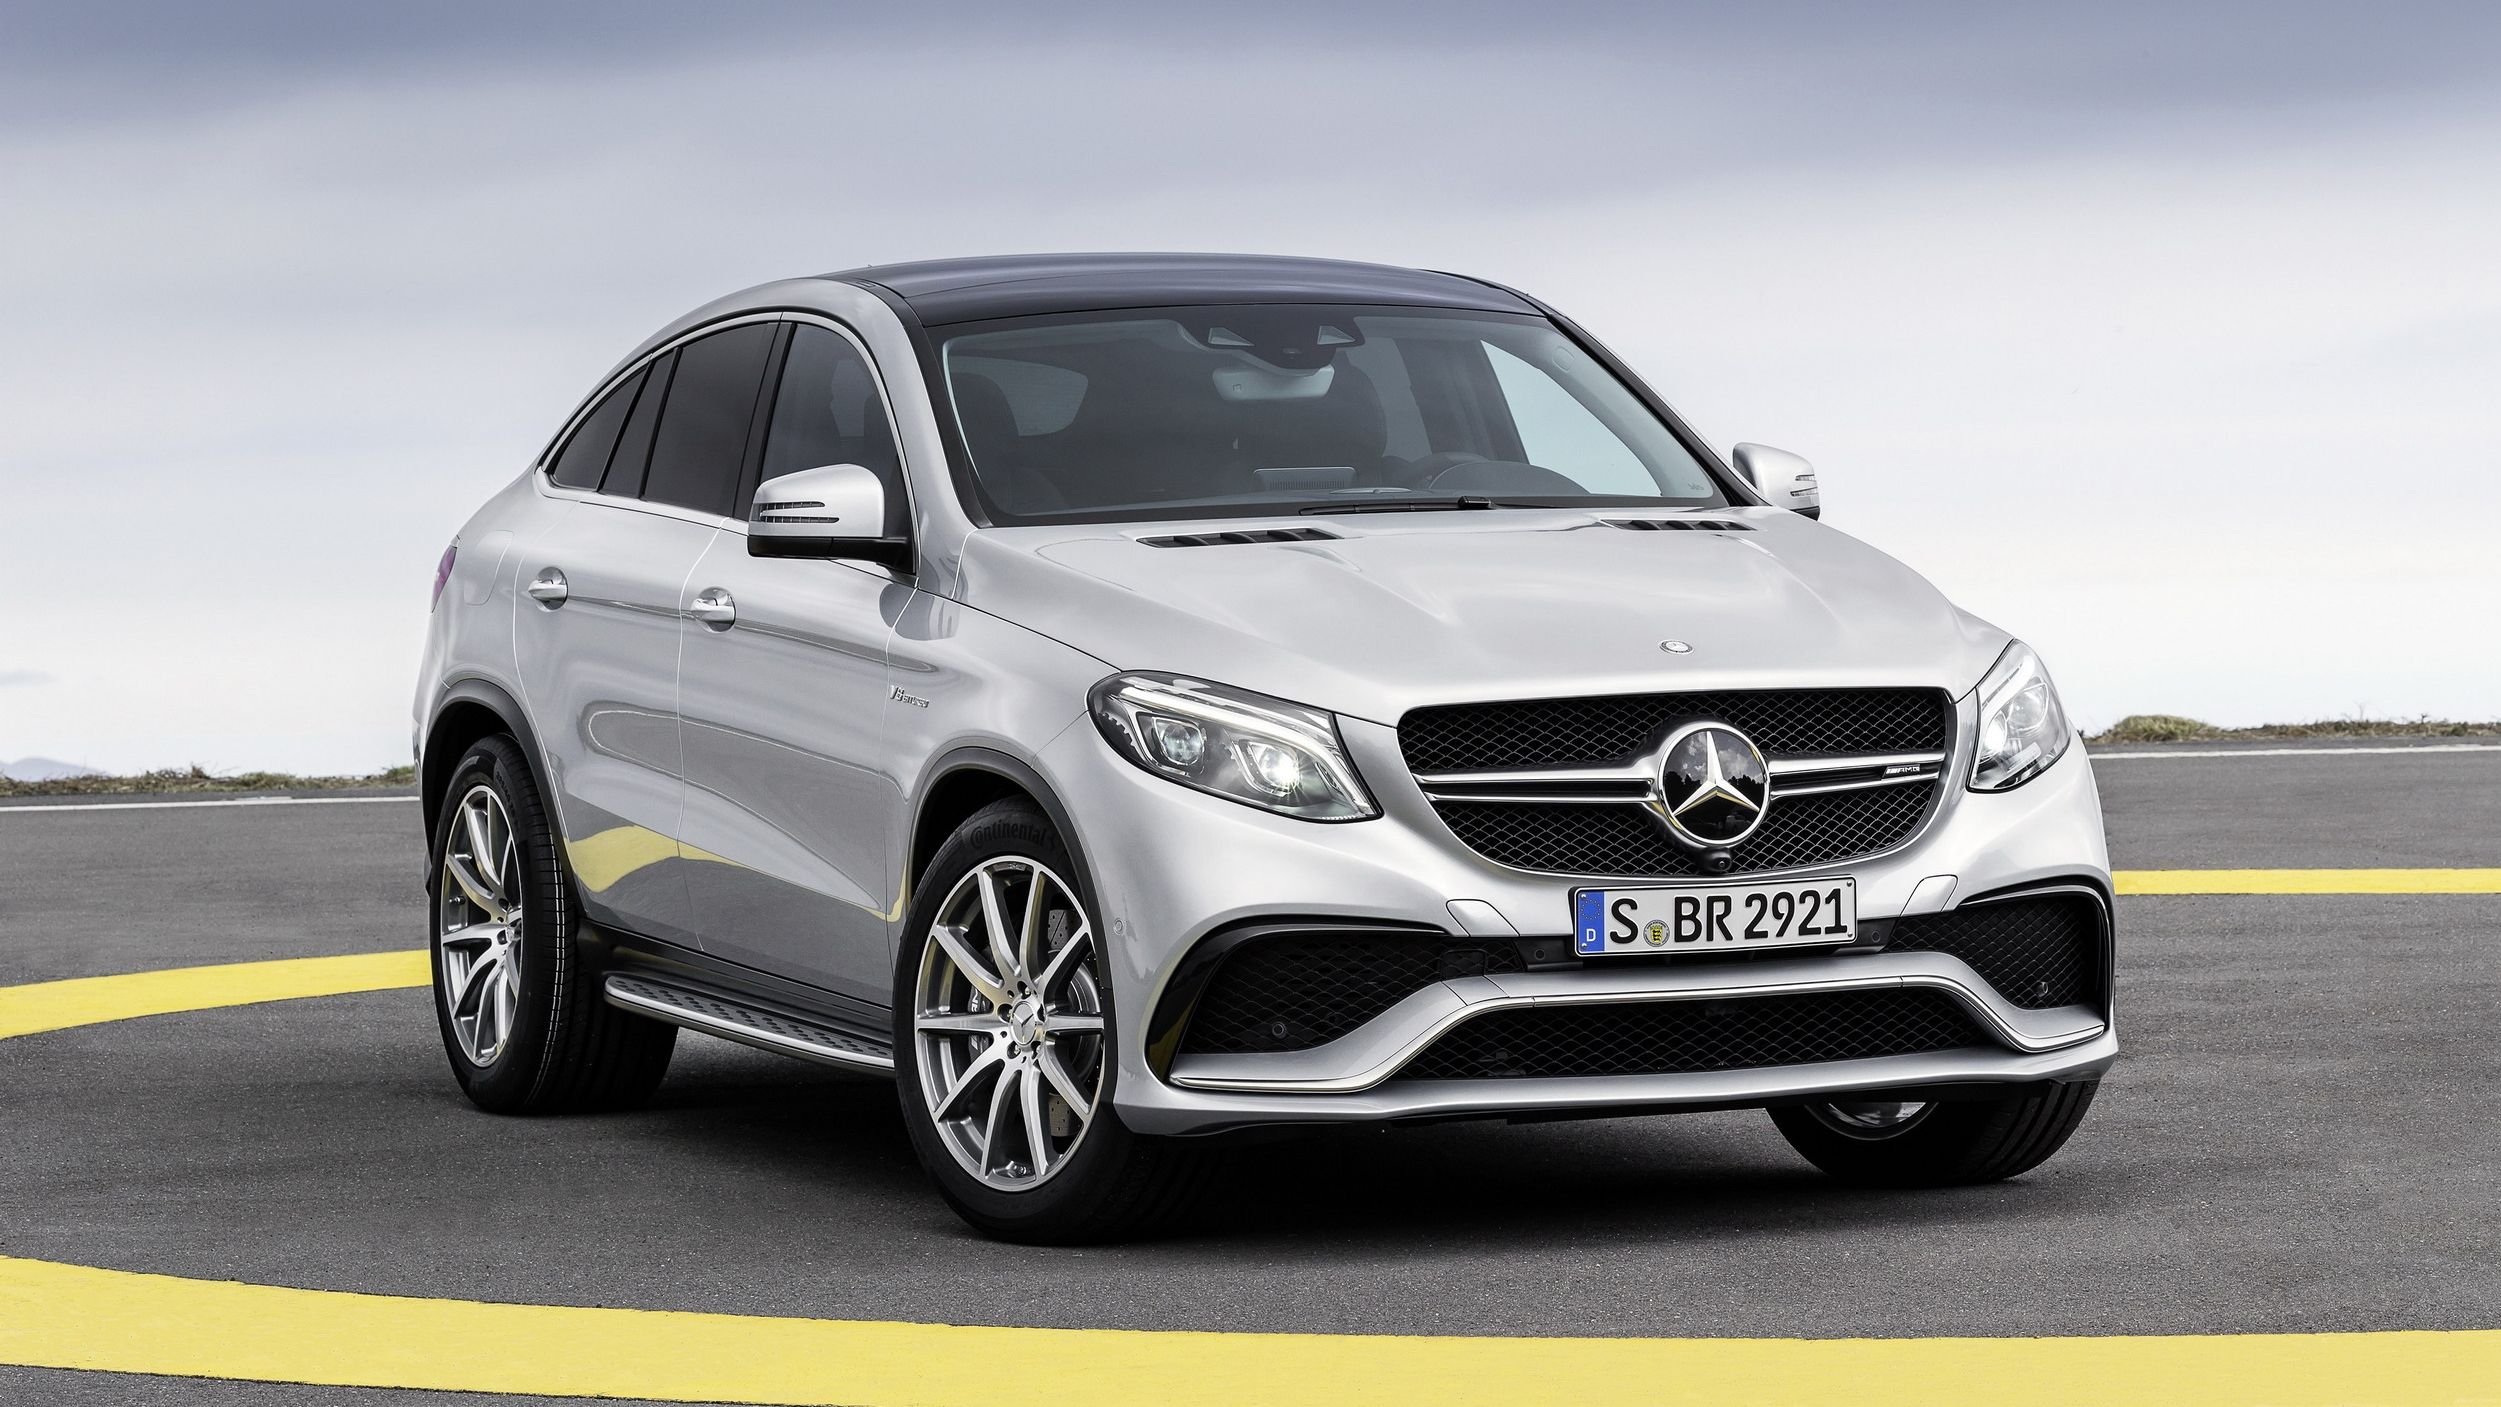  Mercedes-Benz GLE63 AMG Coupe and its quirky proportions made its debut at the 2015 Detroit Auto Show. Check out the details at TopSpeed.com.